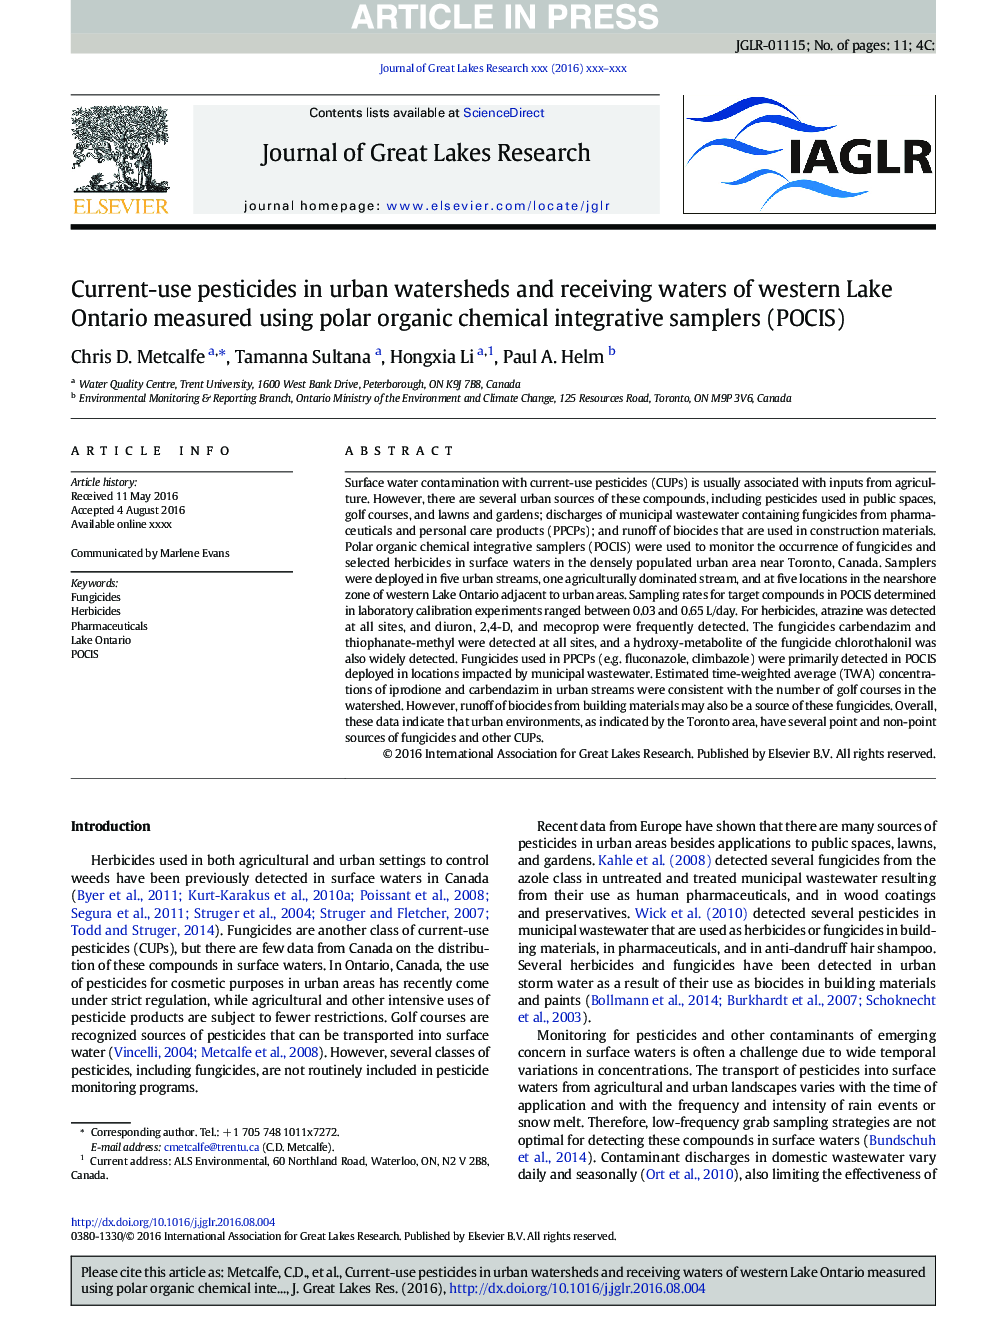 Current-use pesticides in urban watersheds and receiving waters of western Lake Ontario measured using polar organic chemical integrative samplers (POCIS)